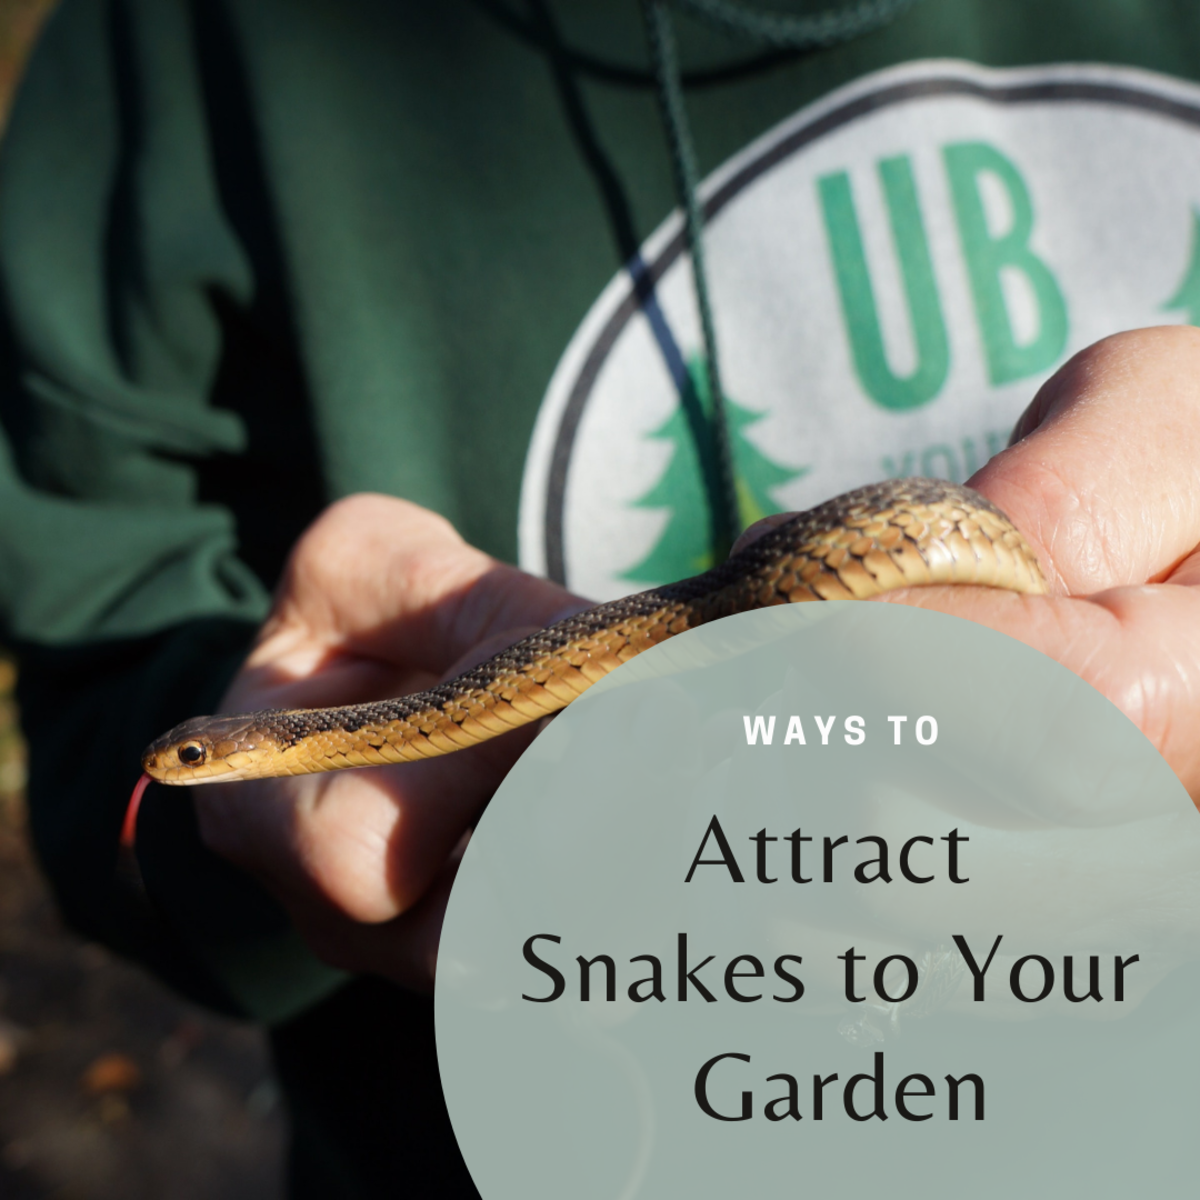 Snakes can be a beneficial presence in your yard or garden.